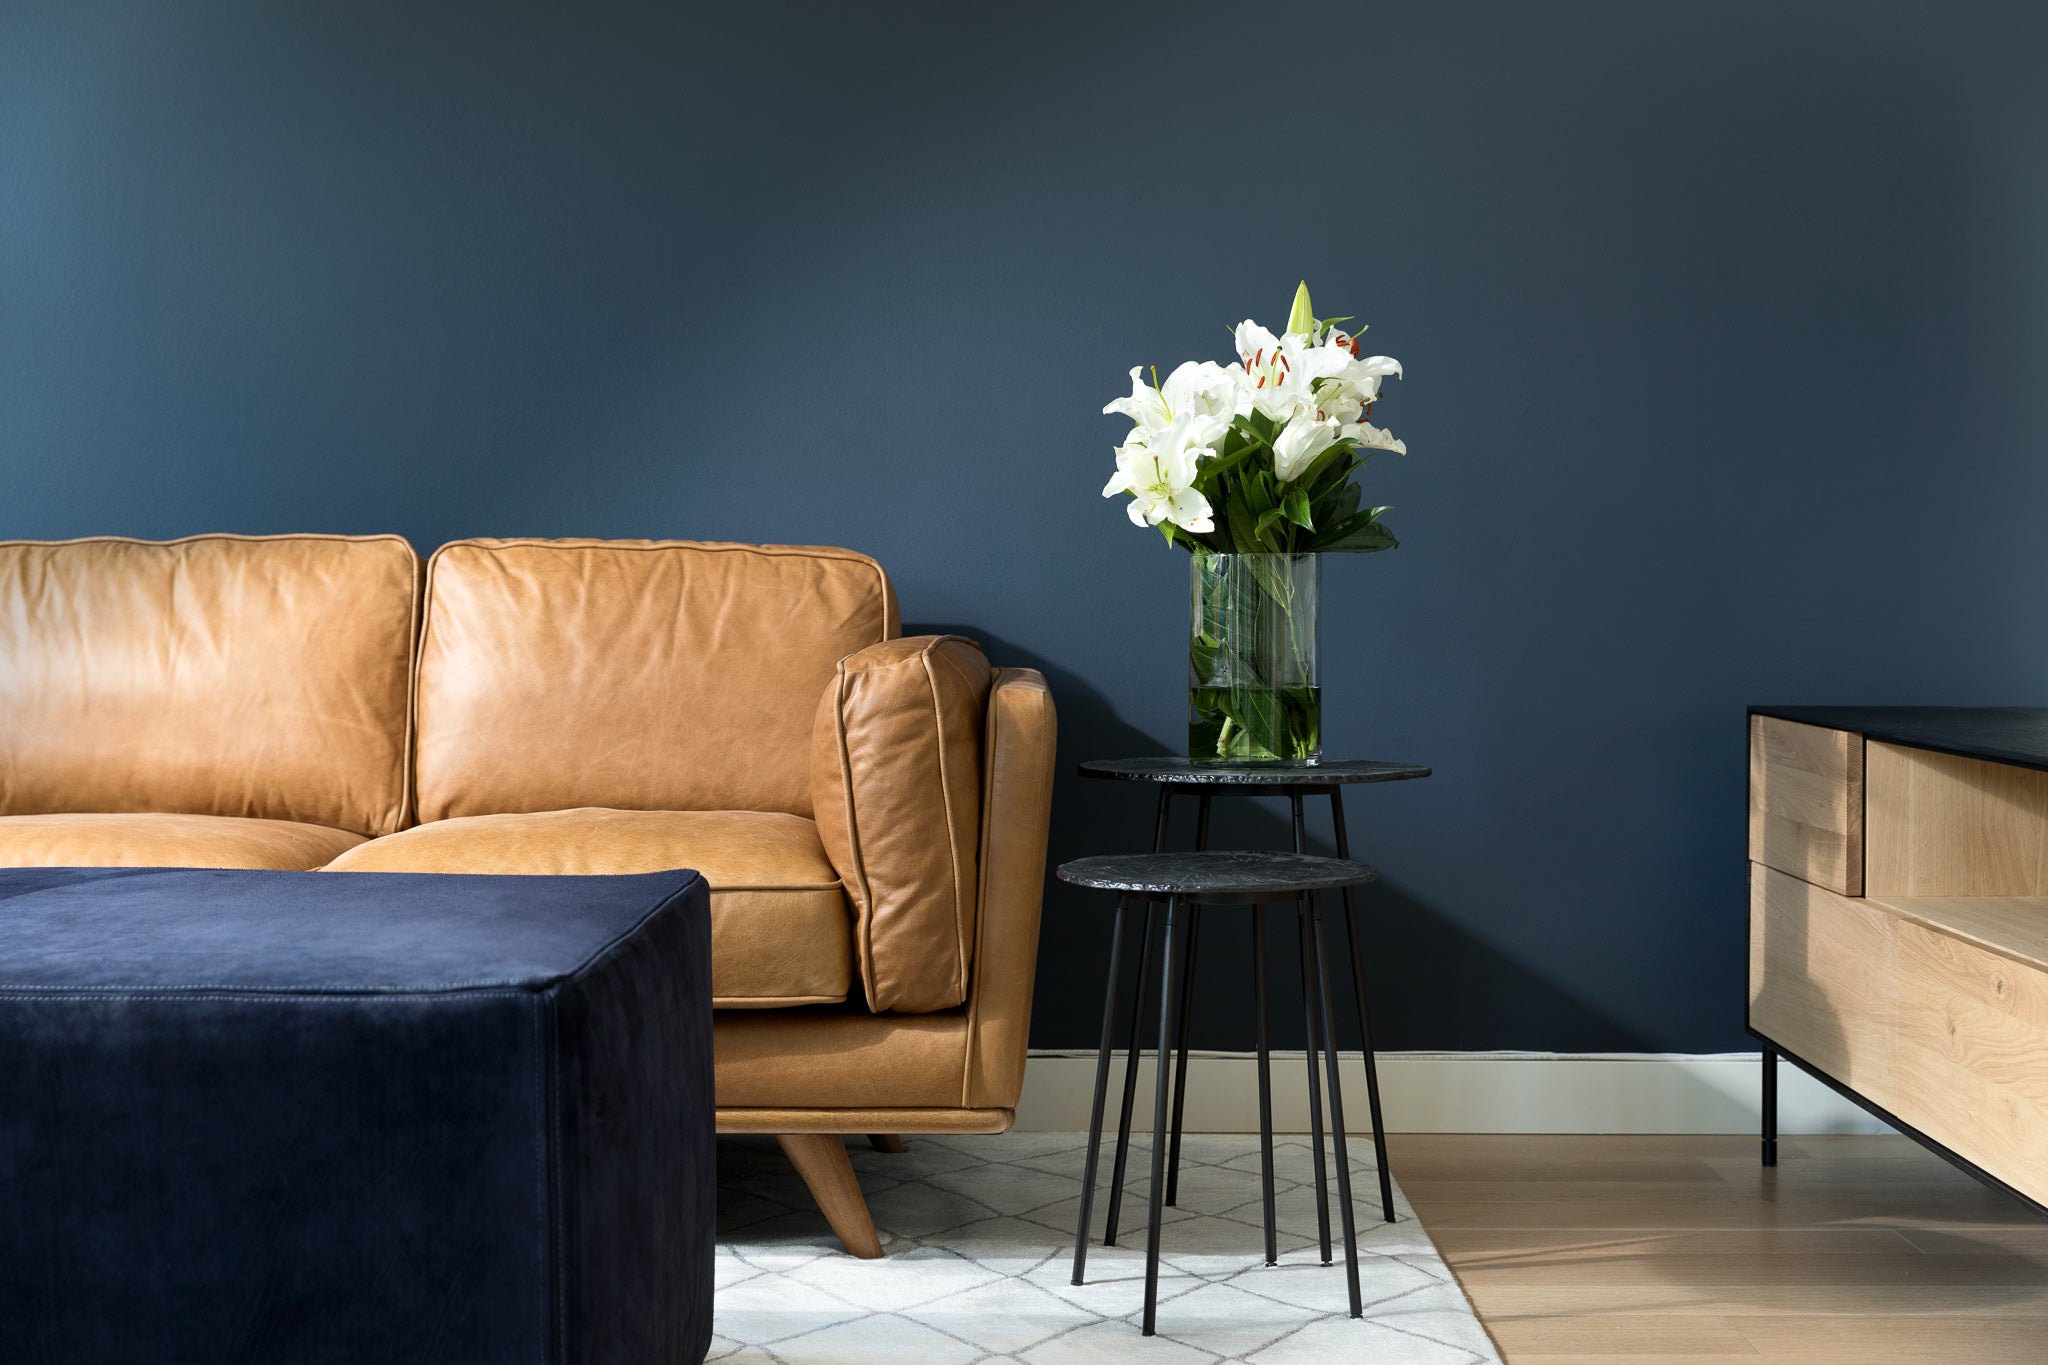 blue suede ottoman by HINTEDFOX in living room setting